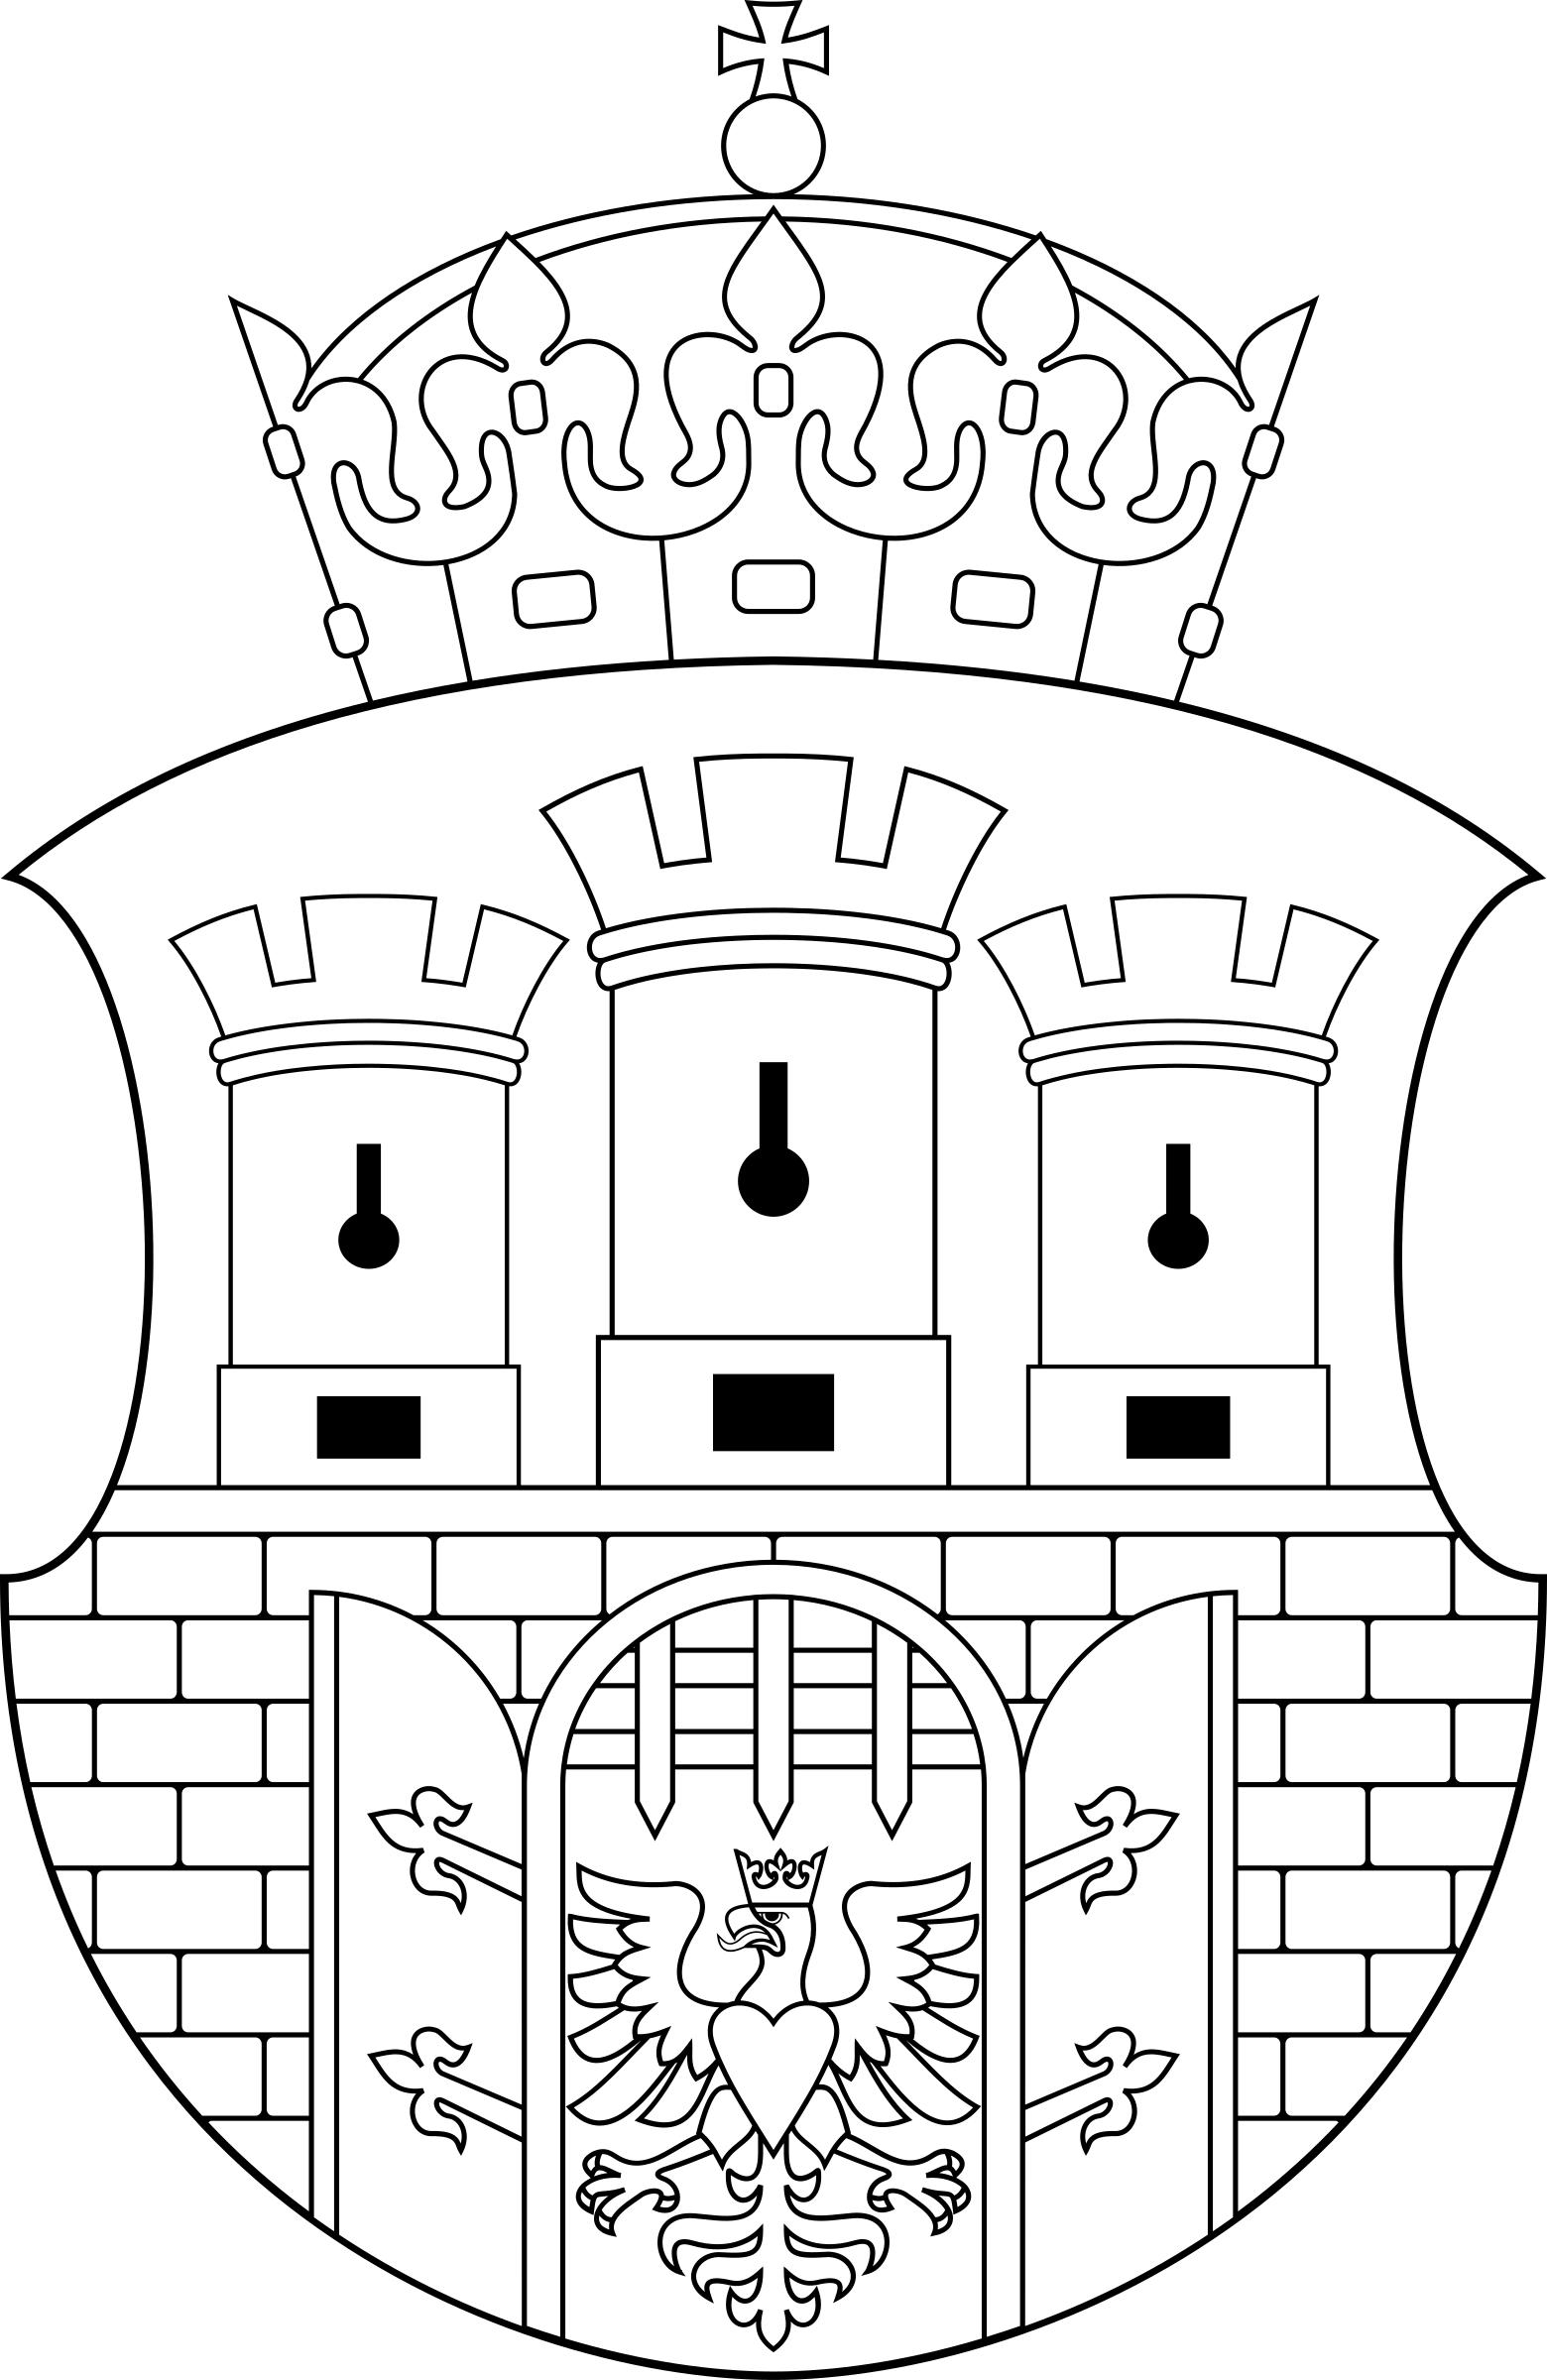 Coat of Arms of Cracow - lineart PNG icons